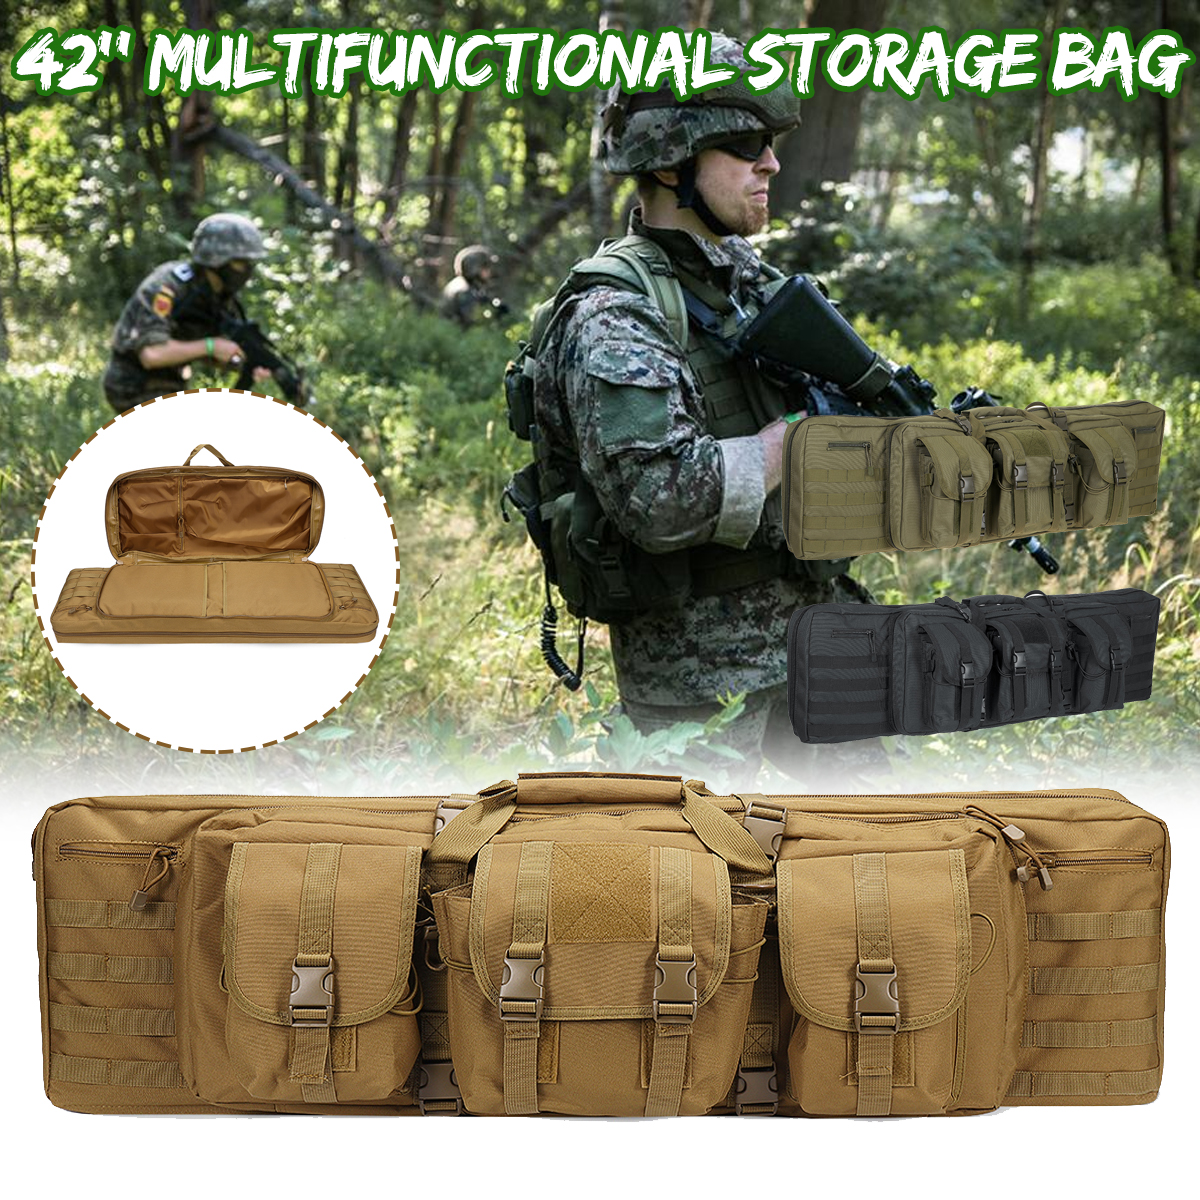 42-inch-Multifunctional-600D-Oxford-Cloth-Outdoor-Tactical-Storage-Bag-Double-Padded-Backpack-1854880-1